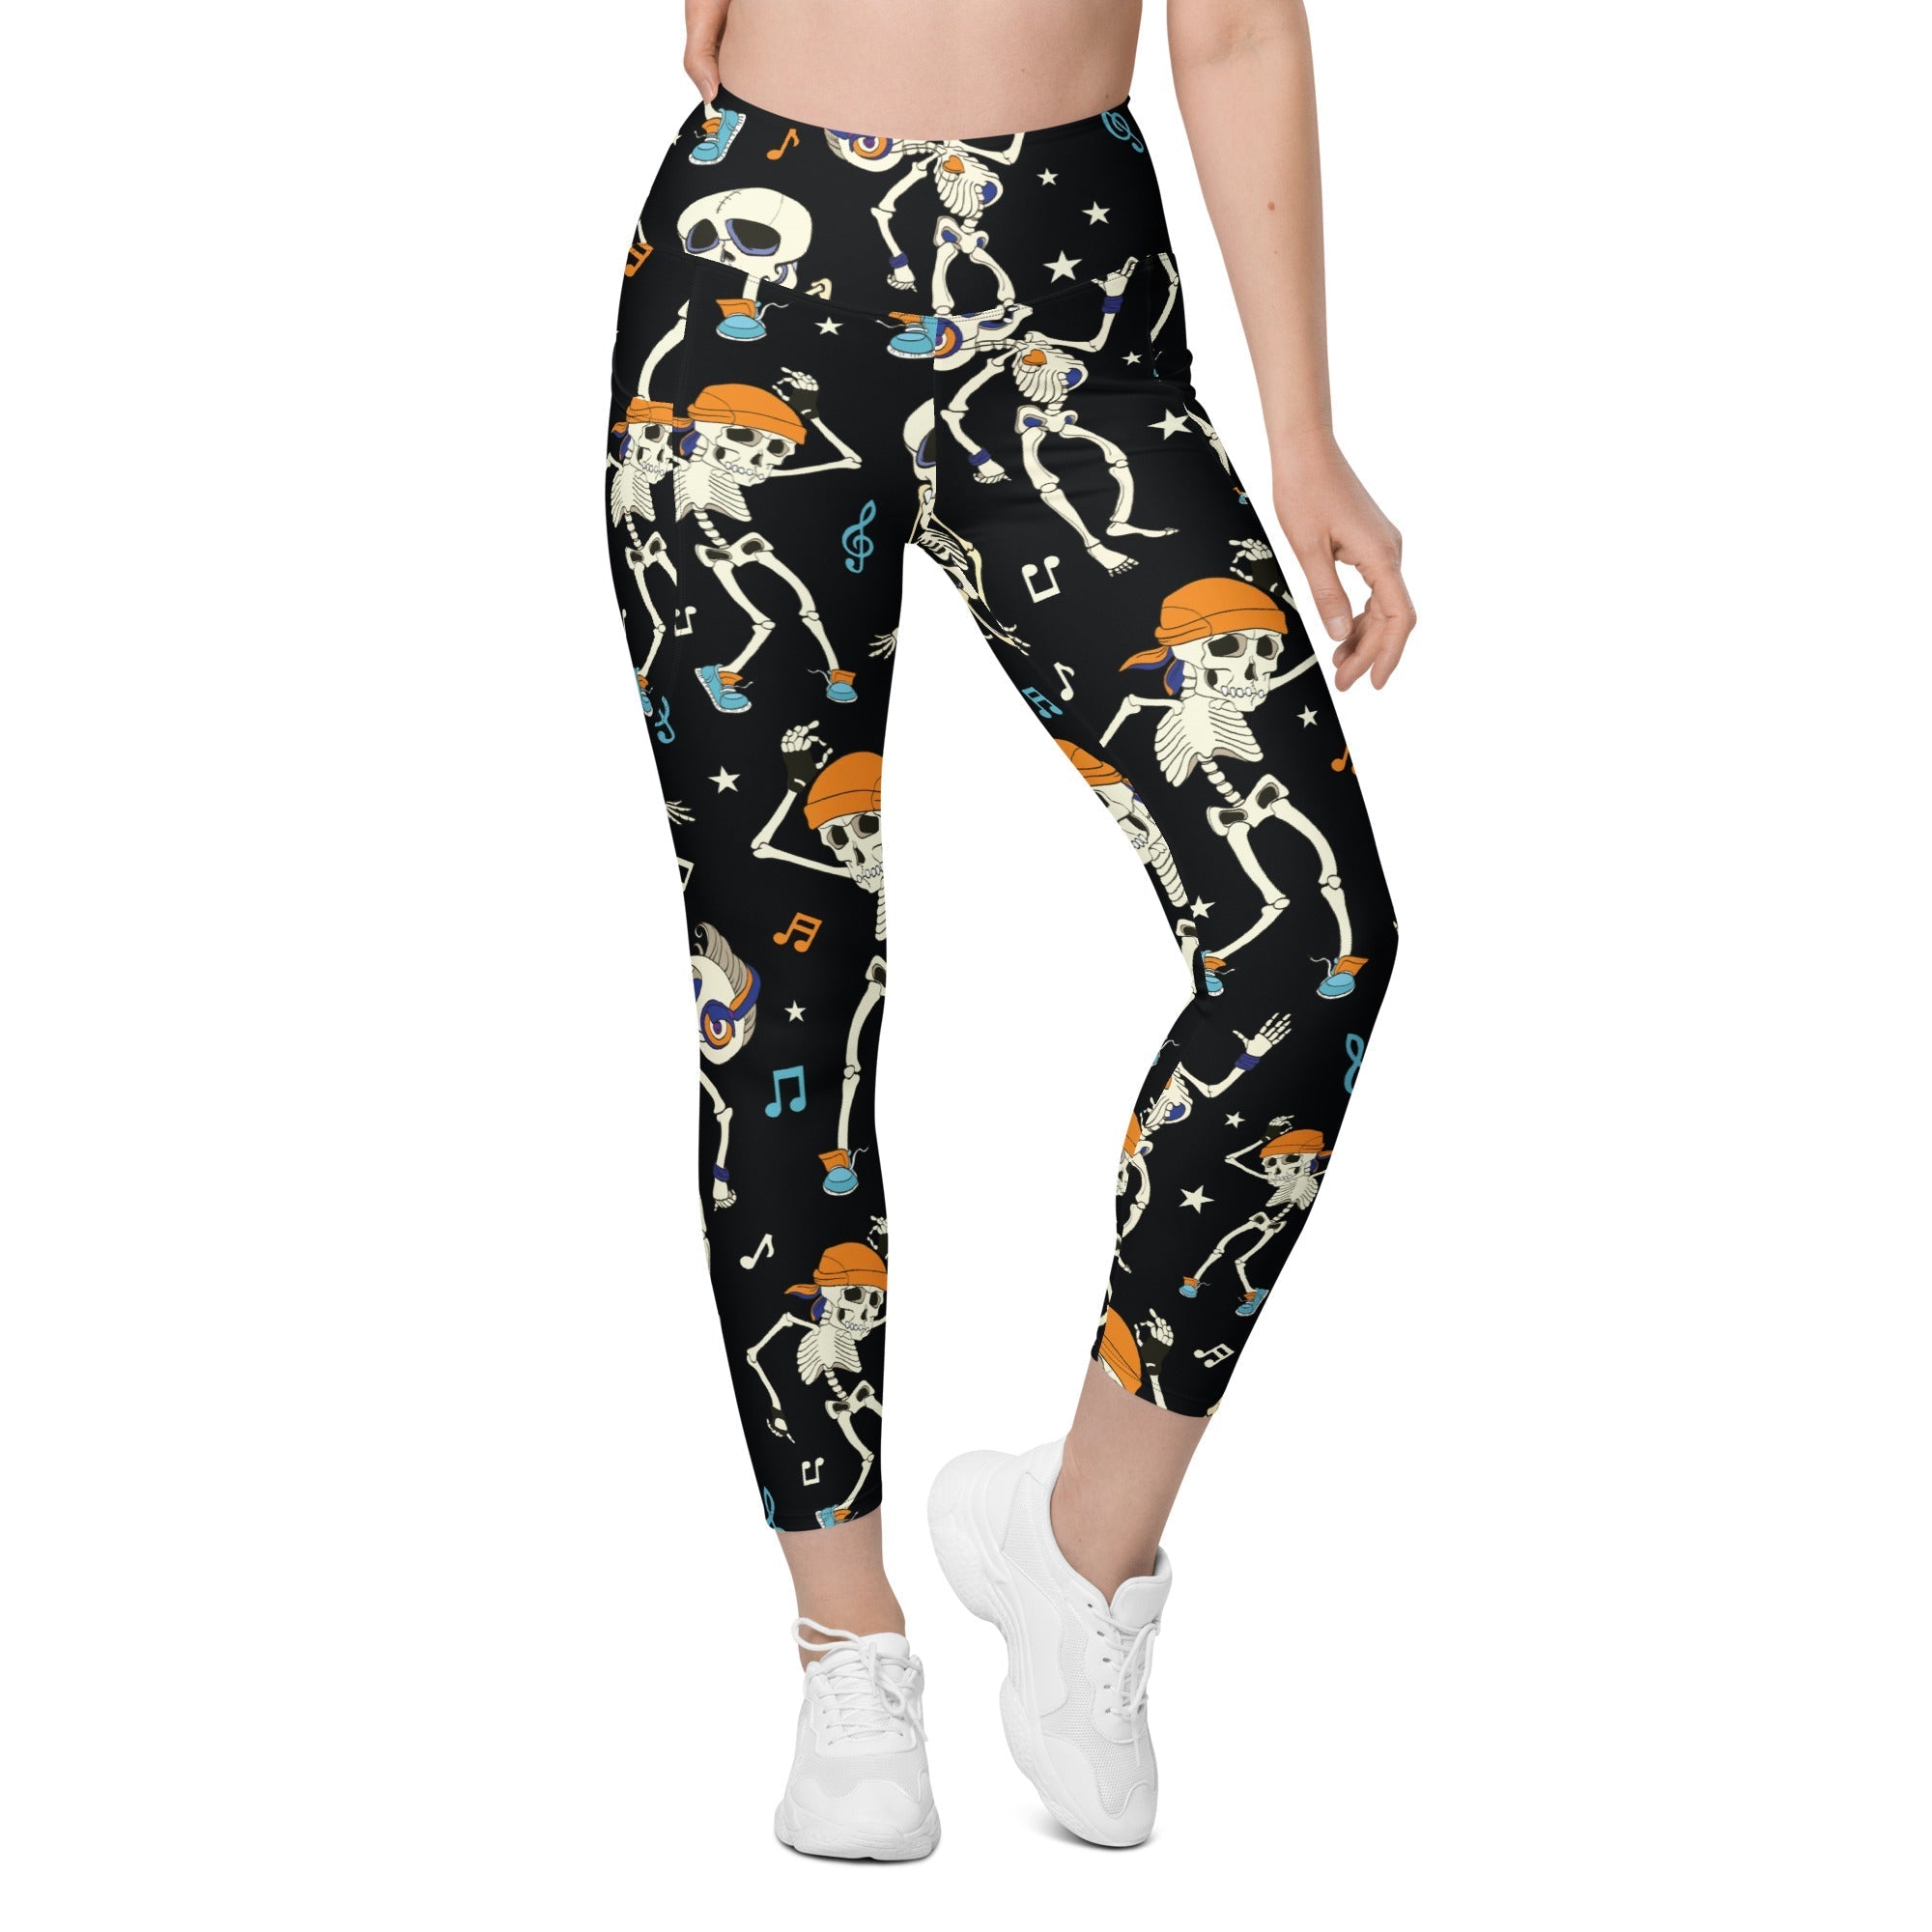 Dancing Skeletons Leggings With Pockets: Women's Halloween Outfits